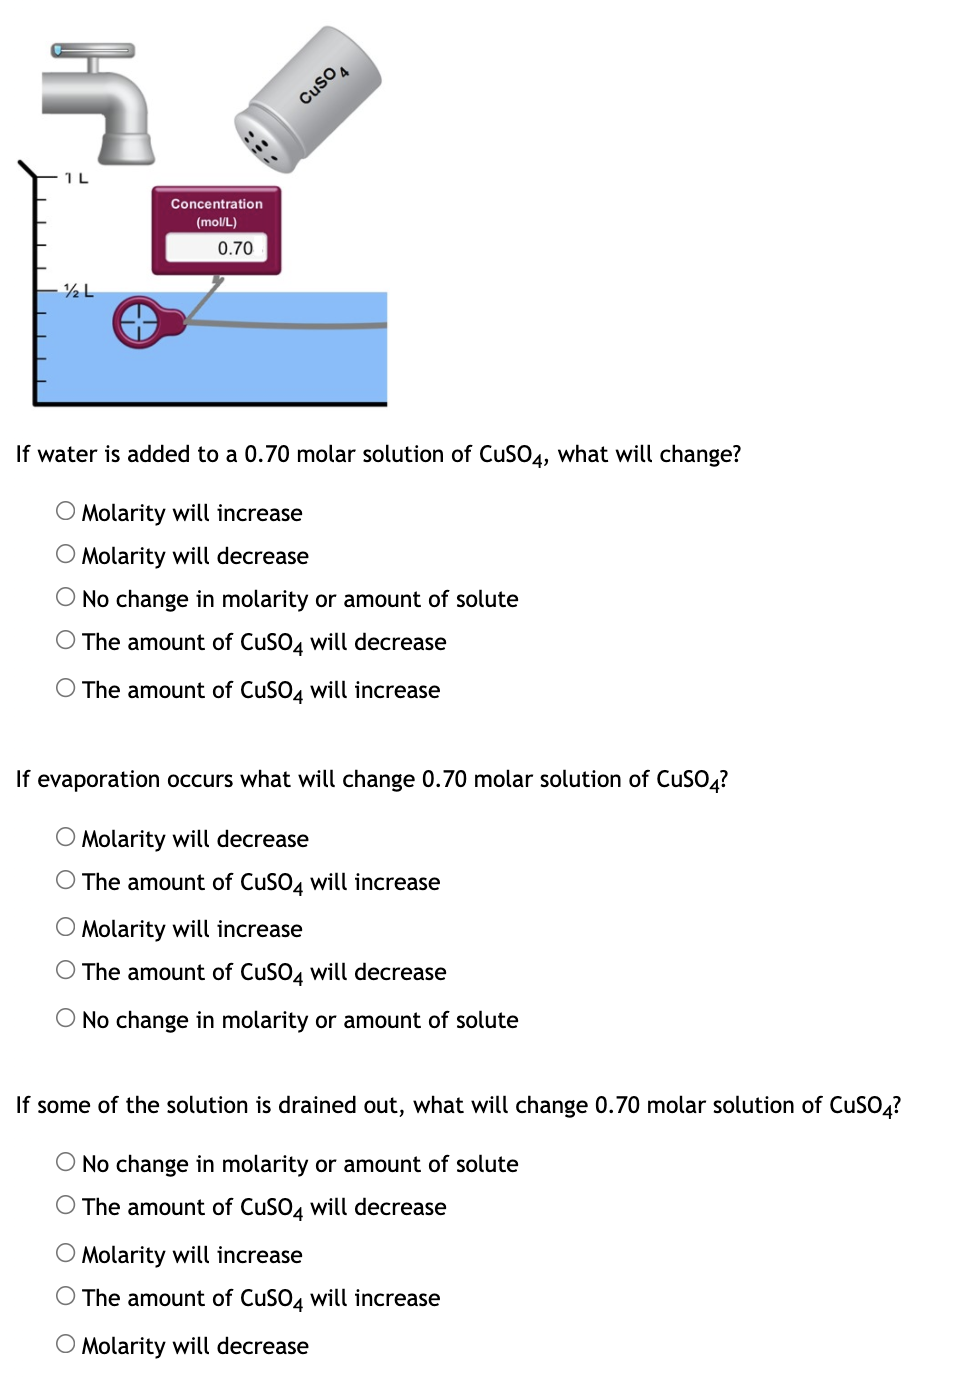 Cuso4
1L
Concentration
(mol/L)
0.70
If water is added to a 0.70 molar solution of CusO4, what will change?
O Molarity will increase
O Molarity will decrease
O No change in molarity or amount of solute
O The amount of CuSO4 will decrease
O The amount of CuSO4 will increase
If evaporation occurs what will change 0.70 molar solution of CuSO,?
O Molarity will decrease
The amount of CuSO4 will increase
O Molarity will increase
O The amount of CuSO4 will decrease
O No change in molarity or amount of solute
If some of the solution is drained out, what will change 0.70 molar solution of CuSO,?
O No change in molarity or amount of solute
O The amount of CuSO4 will decrease
O Molarity will increase
O The amount of CuSO4 will increase
O Molarity will decrease
